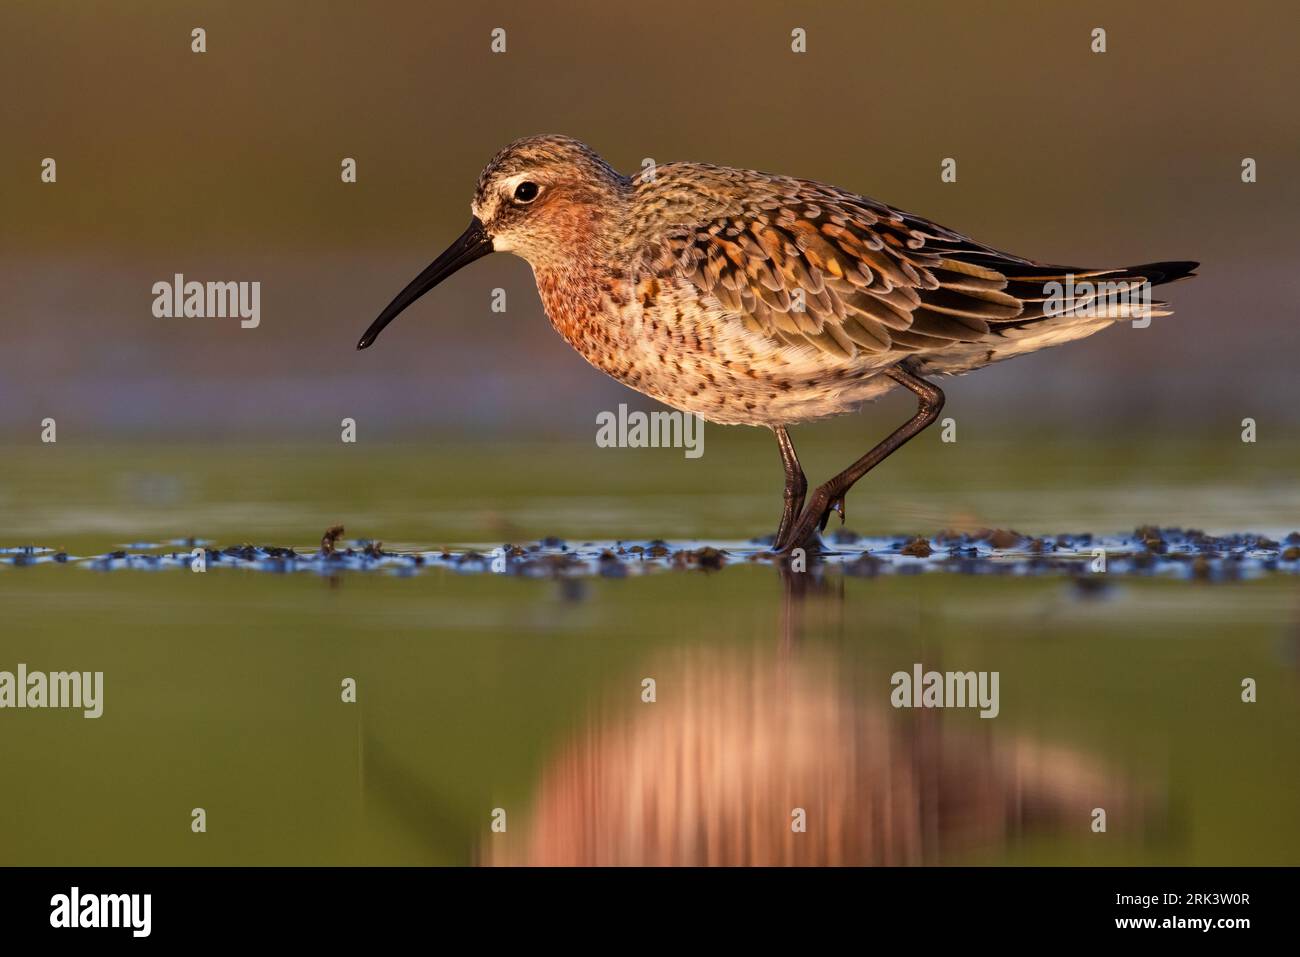 Curlew Sandpiper, Calidris ferruginea, standing in shallow water in Italy. Stock Photo